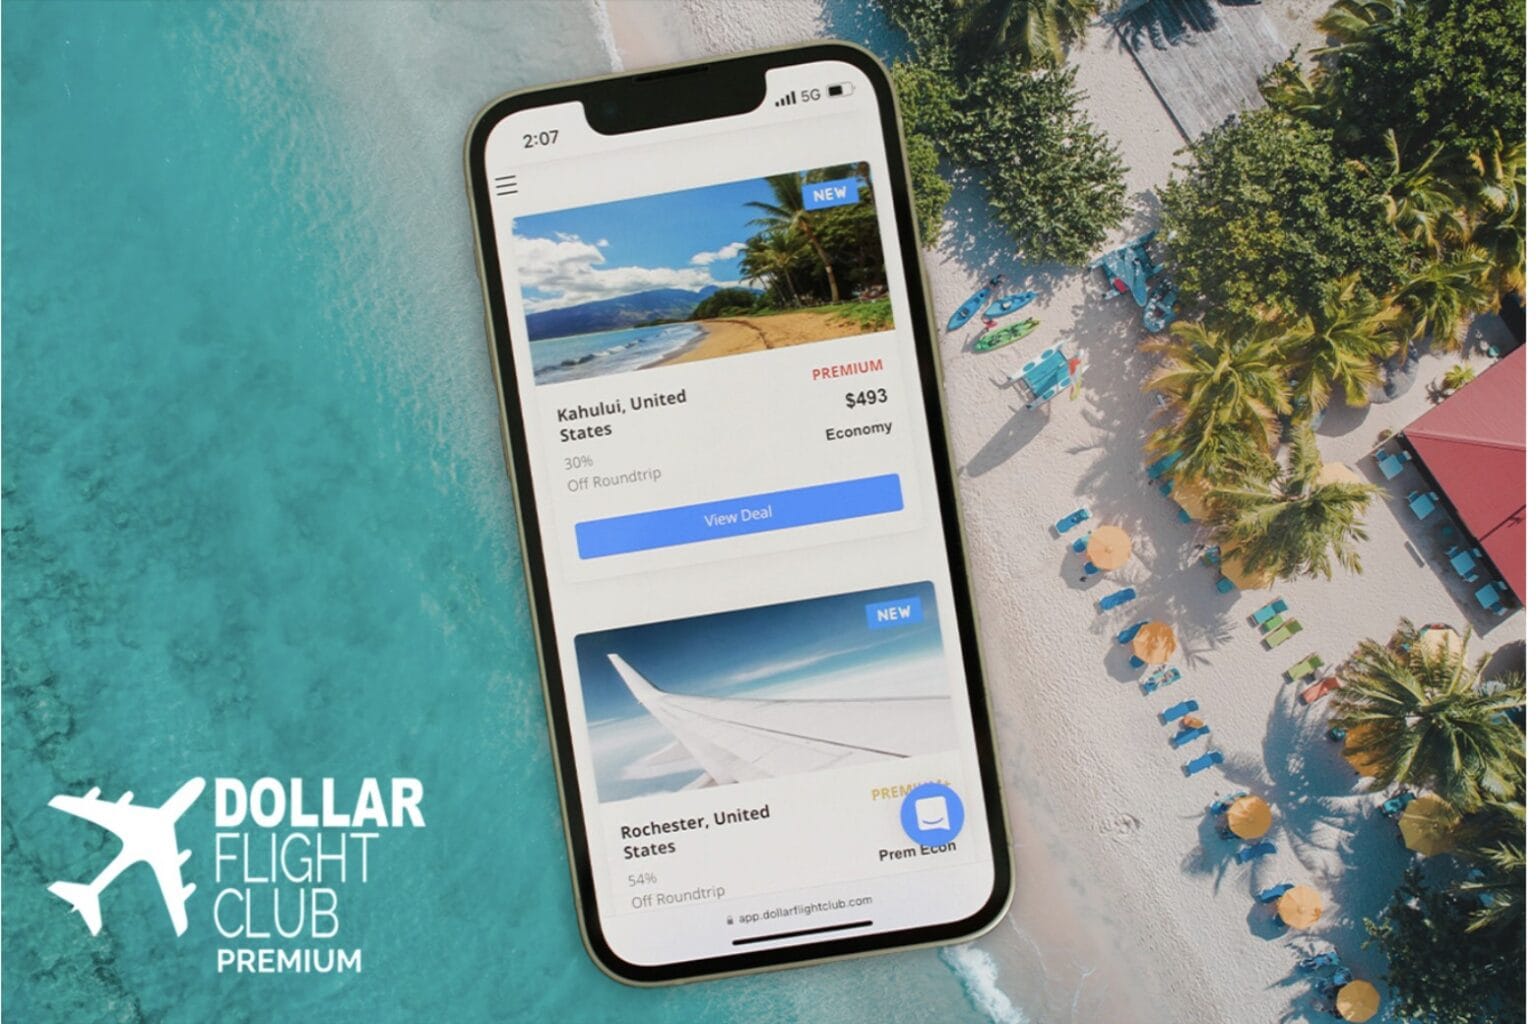 Save on fall travel and beyond with this $70 Dollar Flight Club subscription.